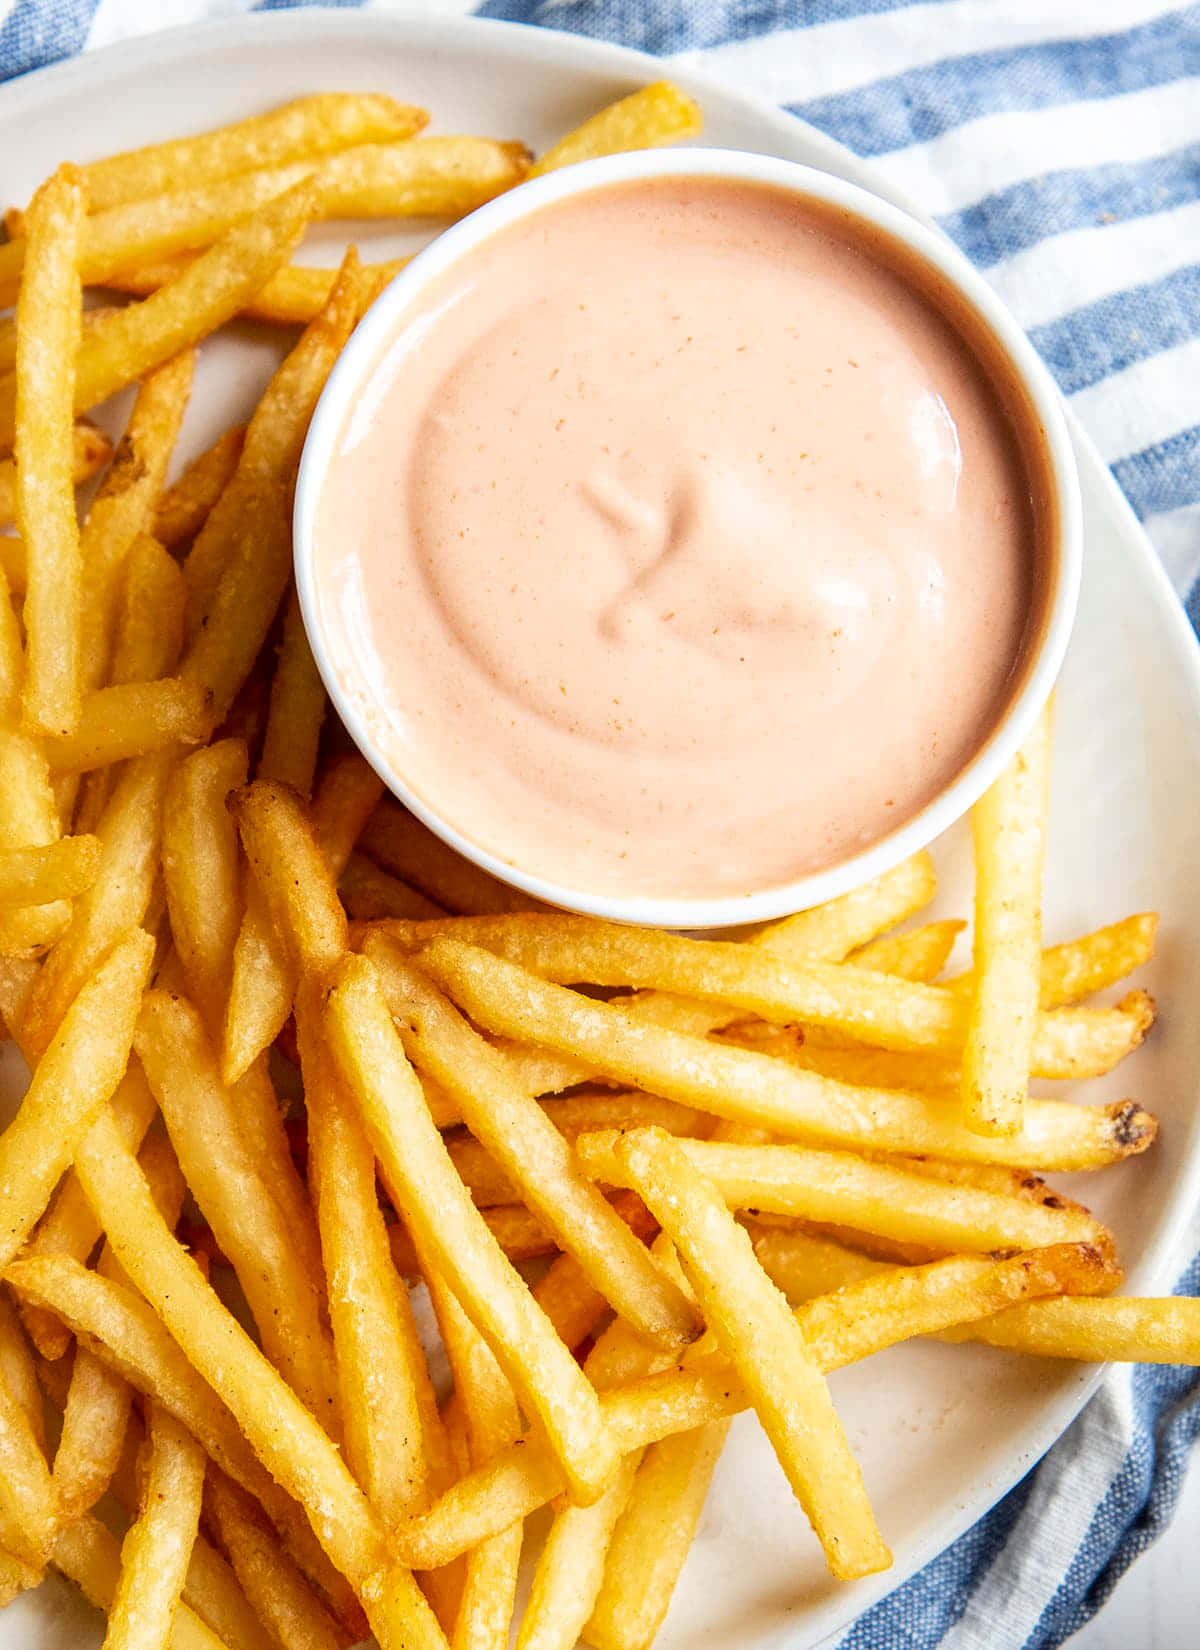 A medley of delicious French fries"